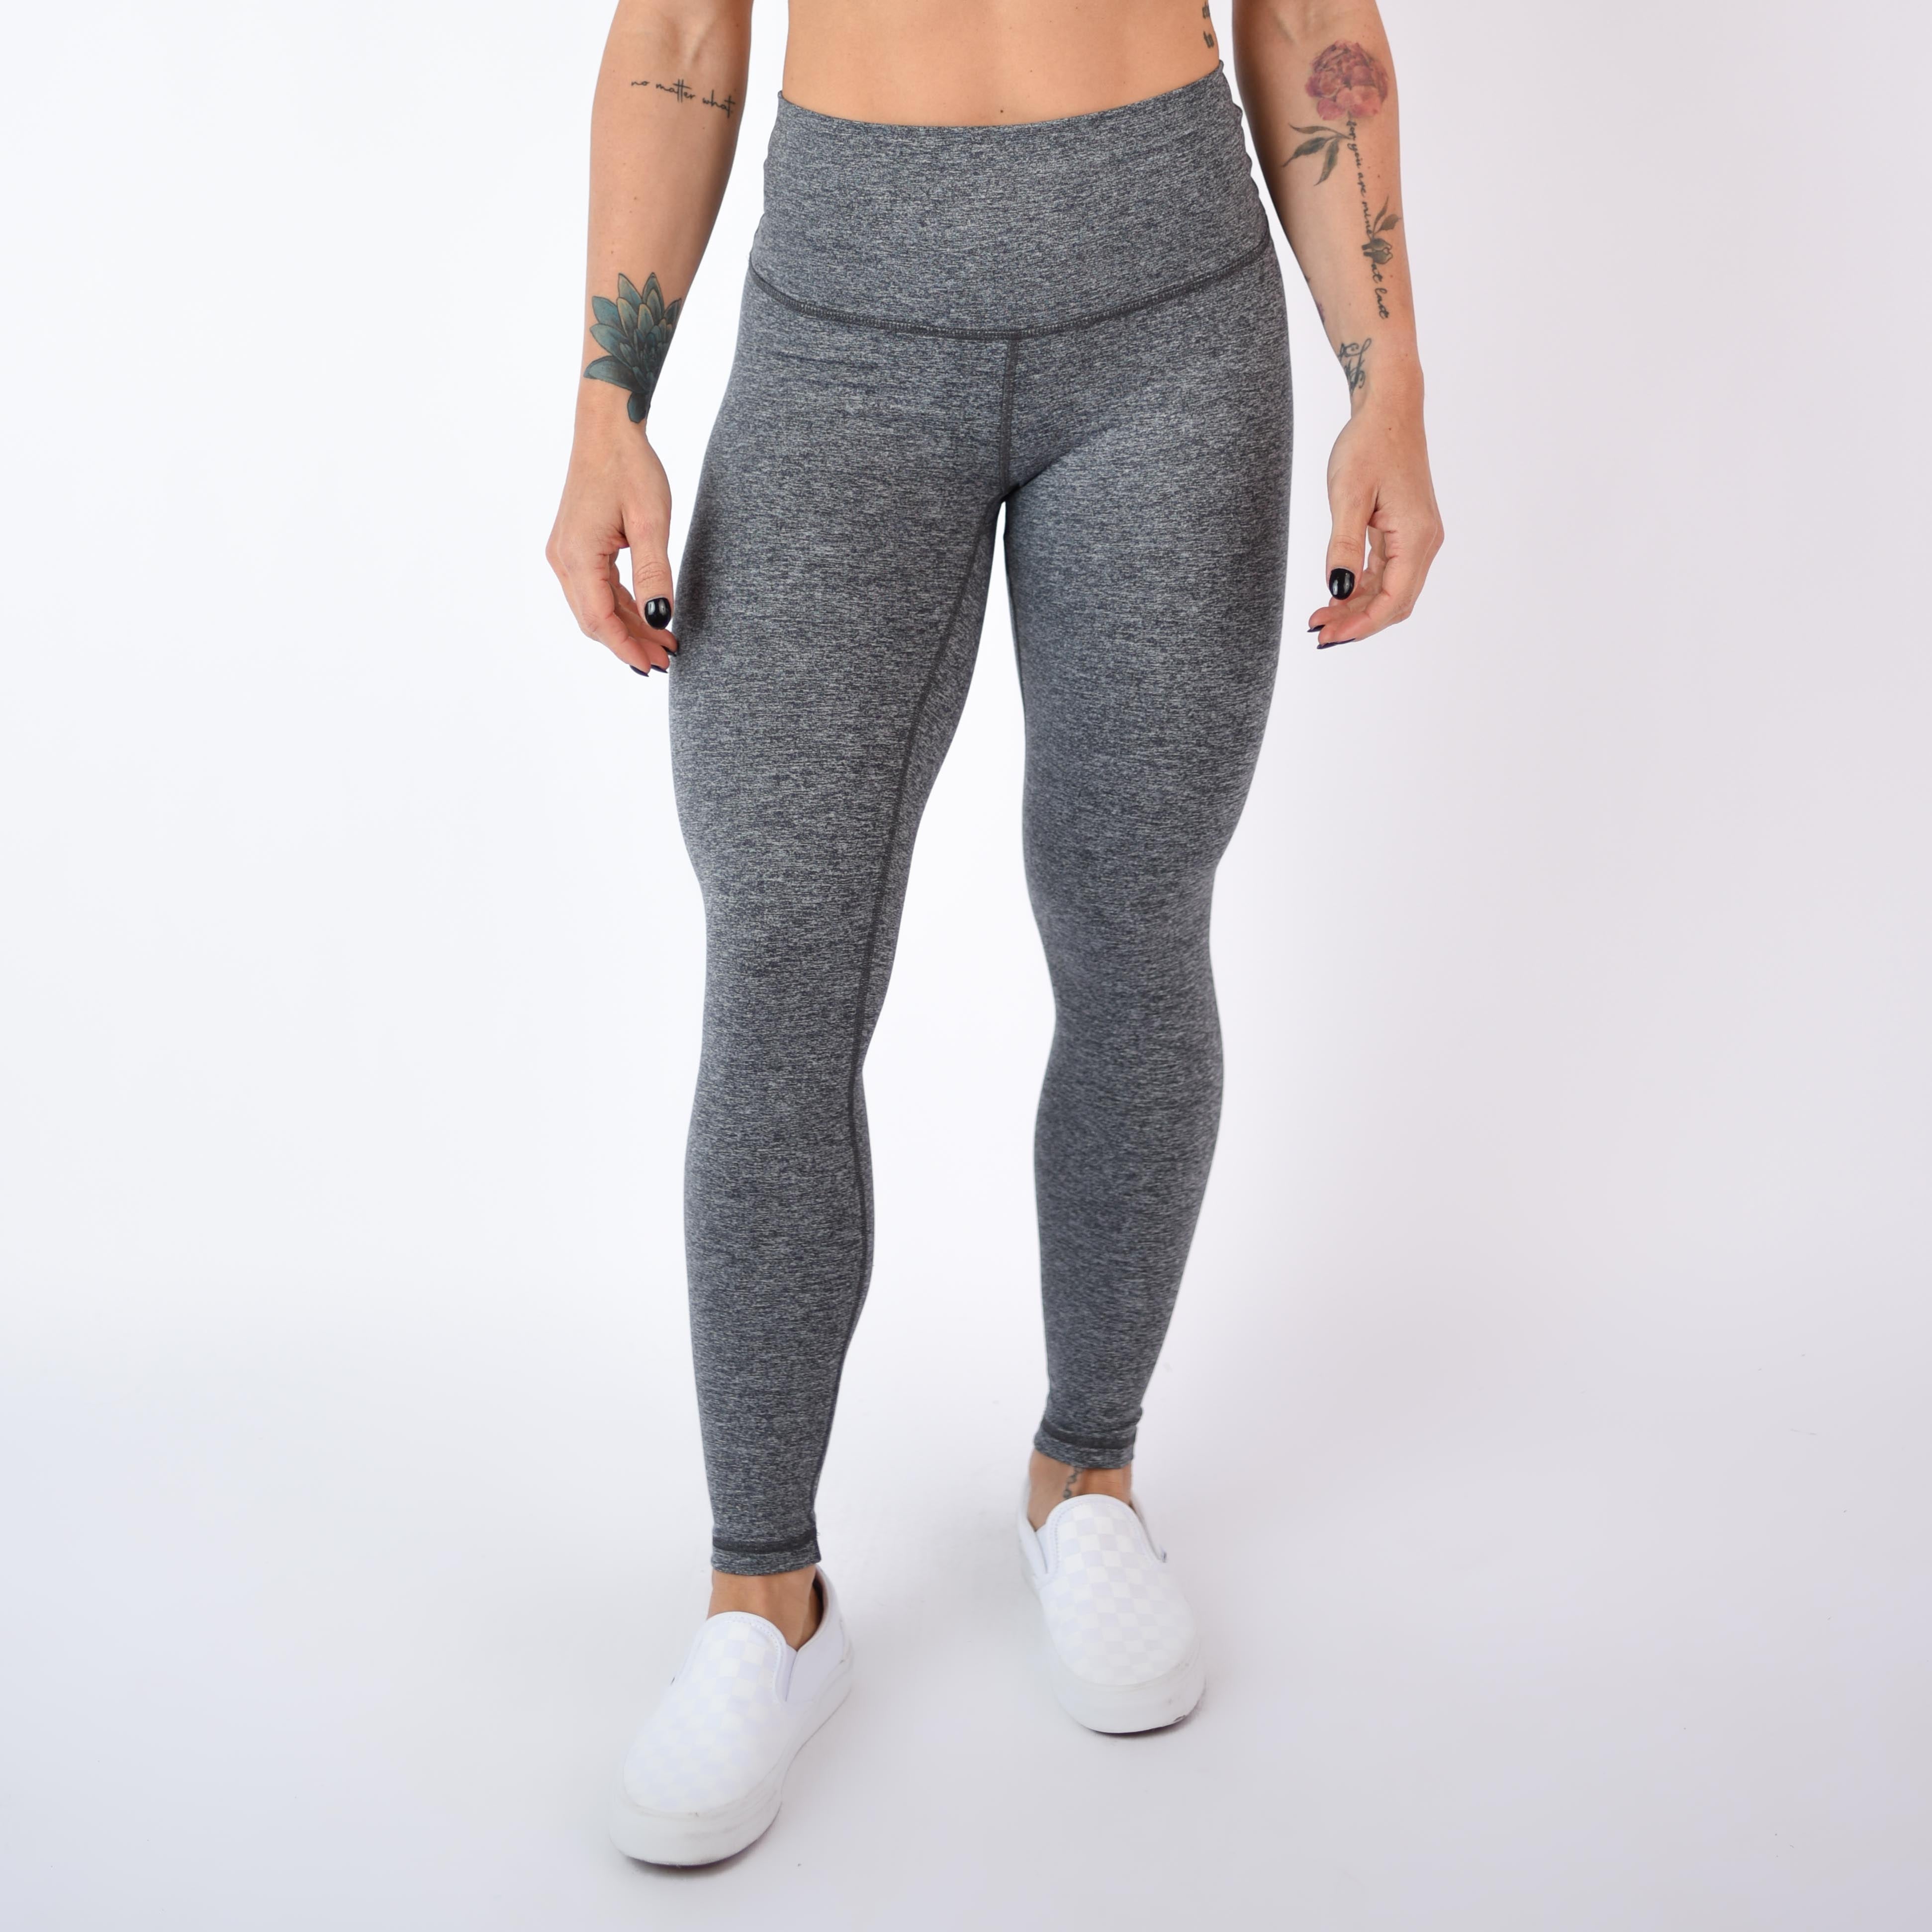 FLEO IS BACK!! 💫Get ready for the Super High Legging, the buttery